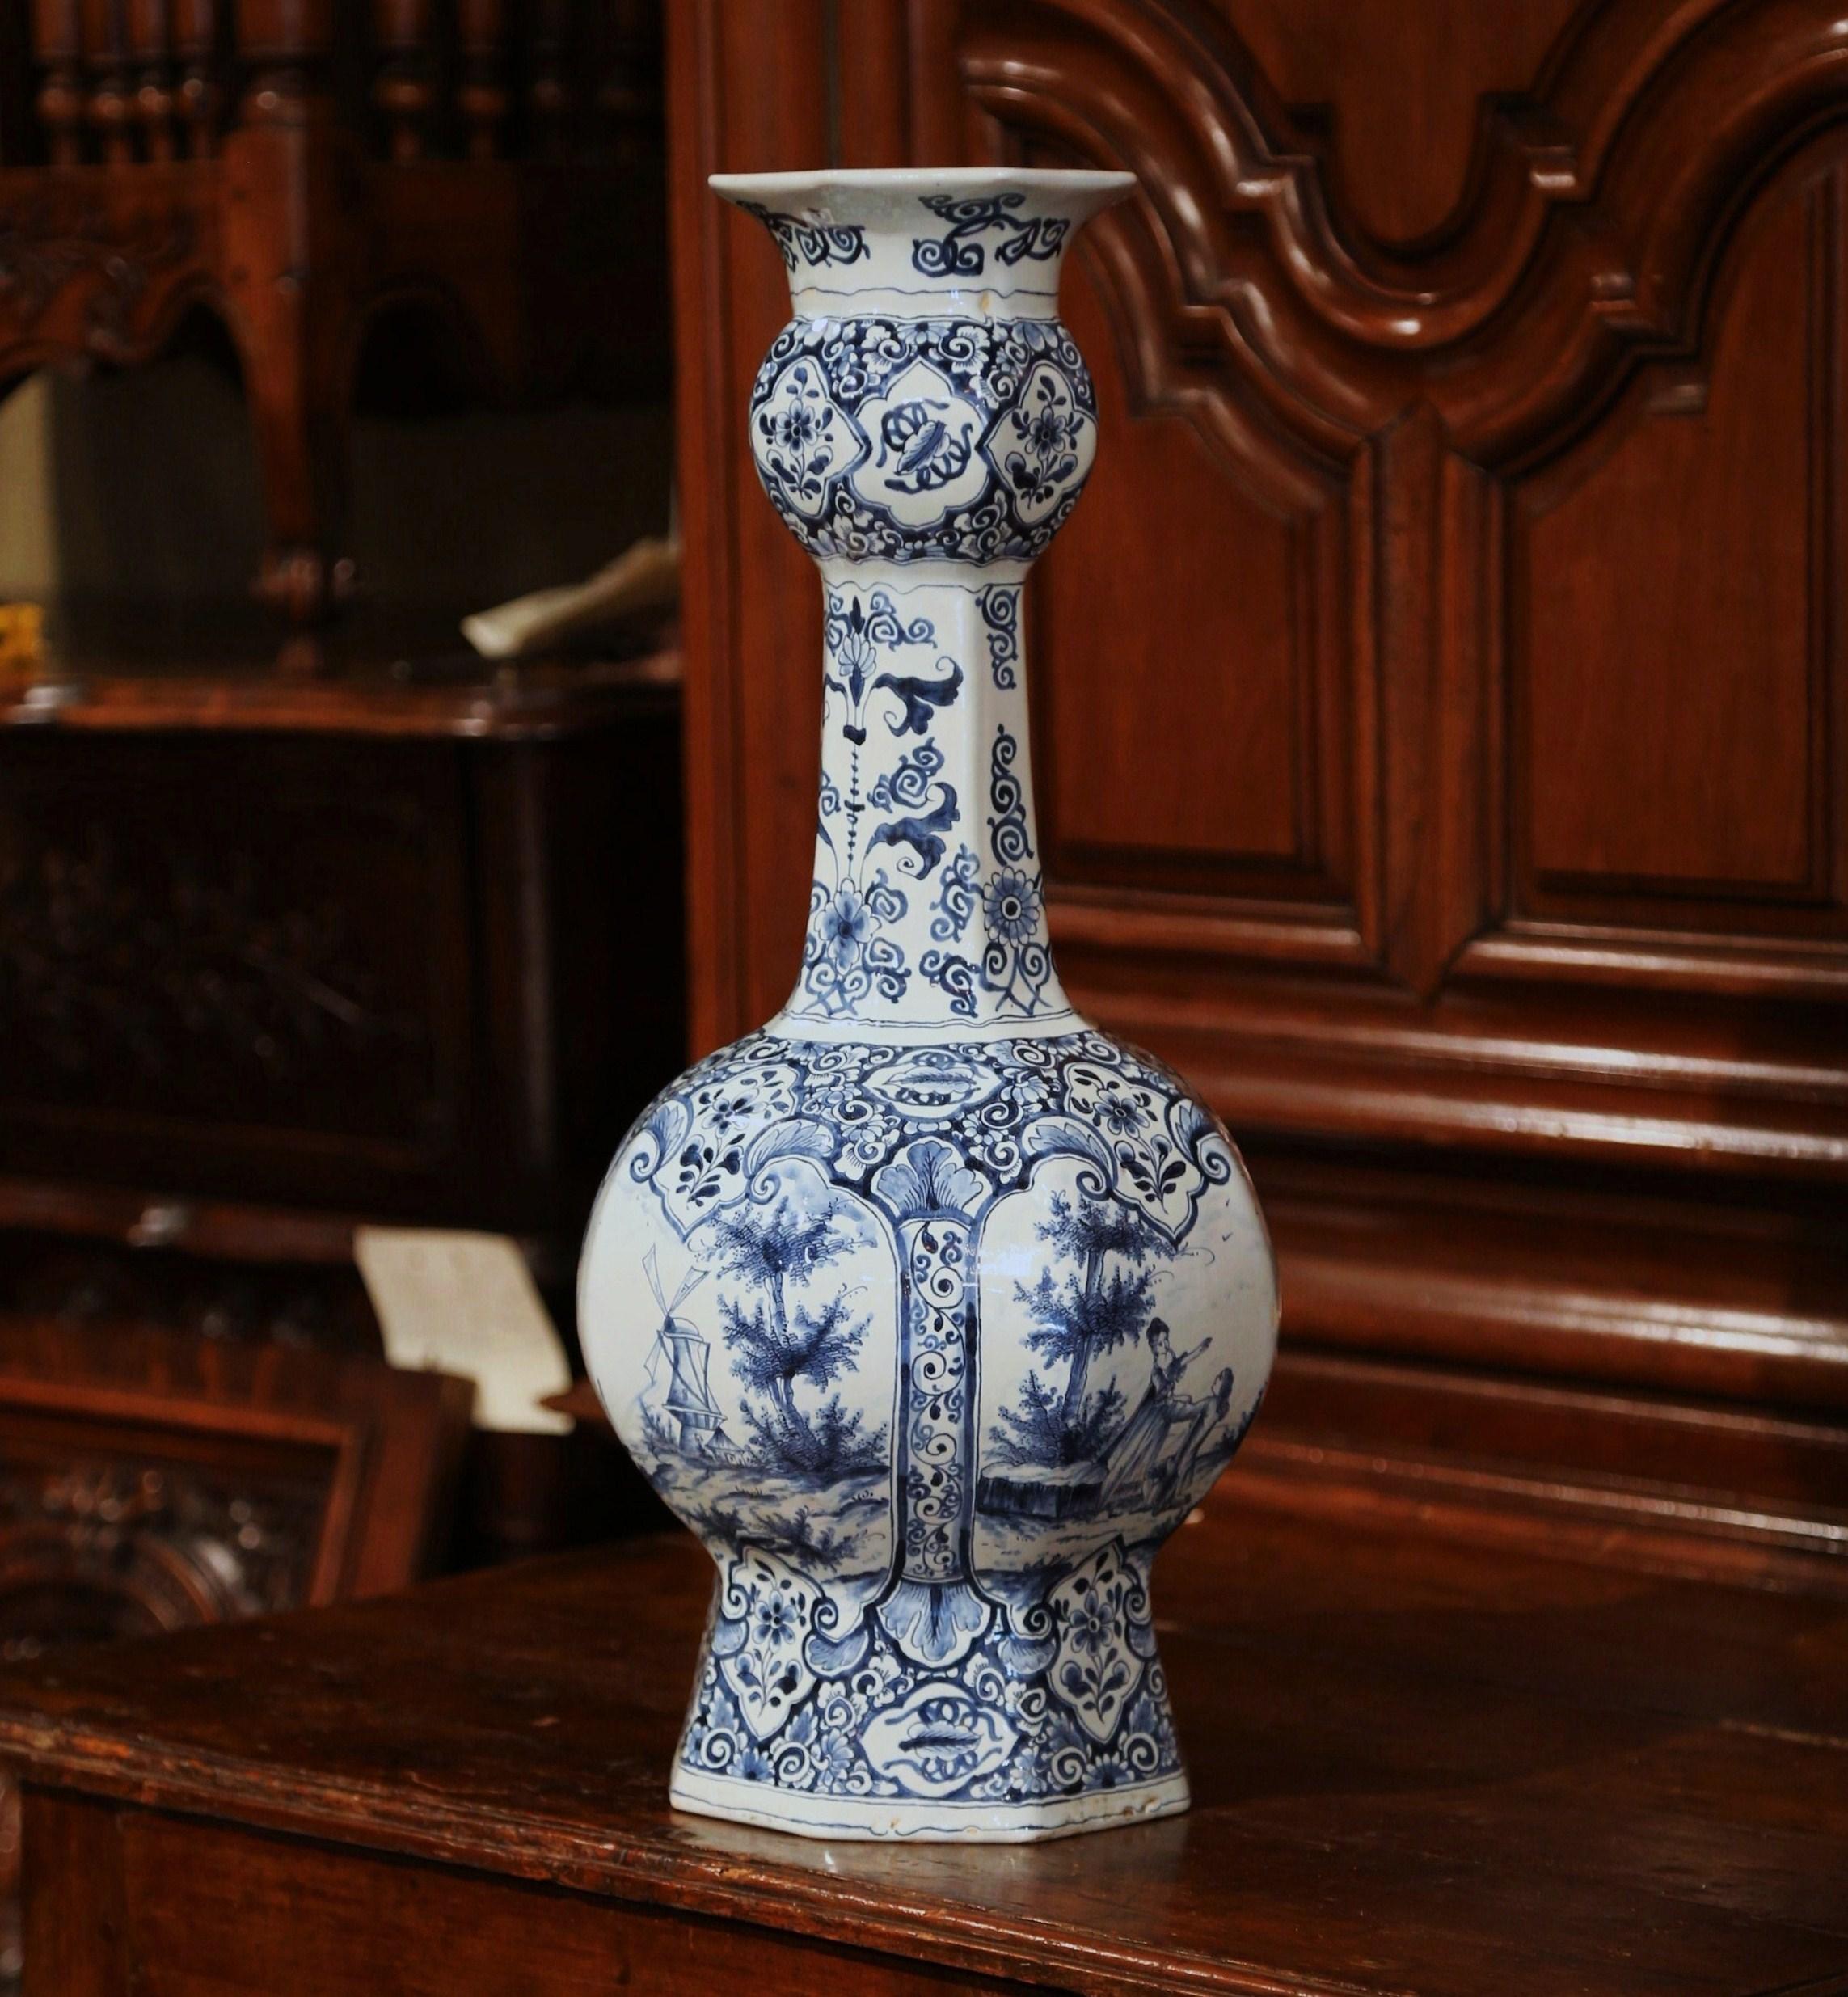 Place this large antique delft vase in your entryway for classic, traditional style. Crafted in Holland, circa 1850, the tall faience vase is beautiful in shape and form with a rounded body and a long, thin neck. Hand painted in the traditional blue